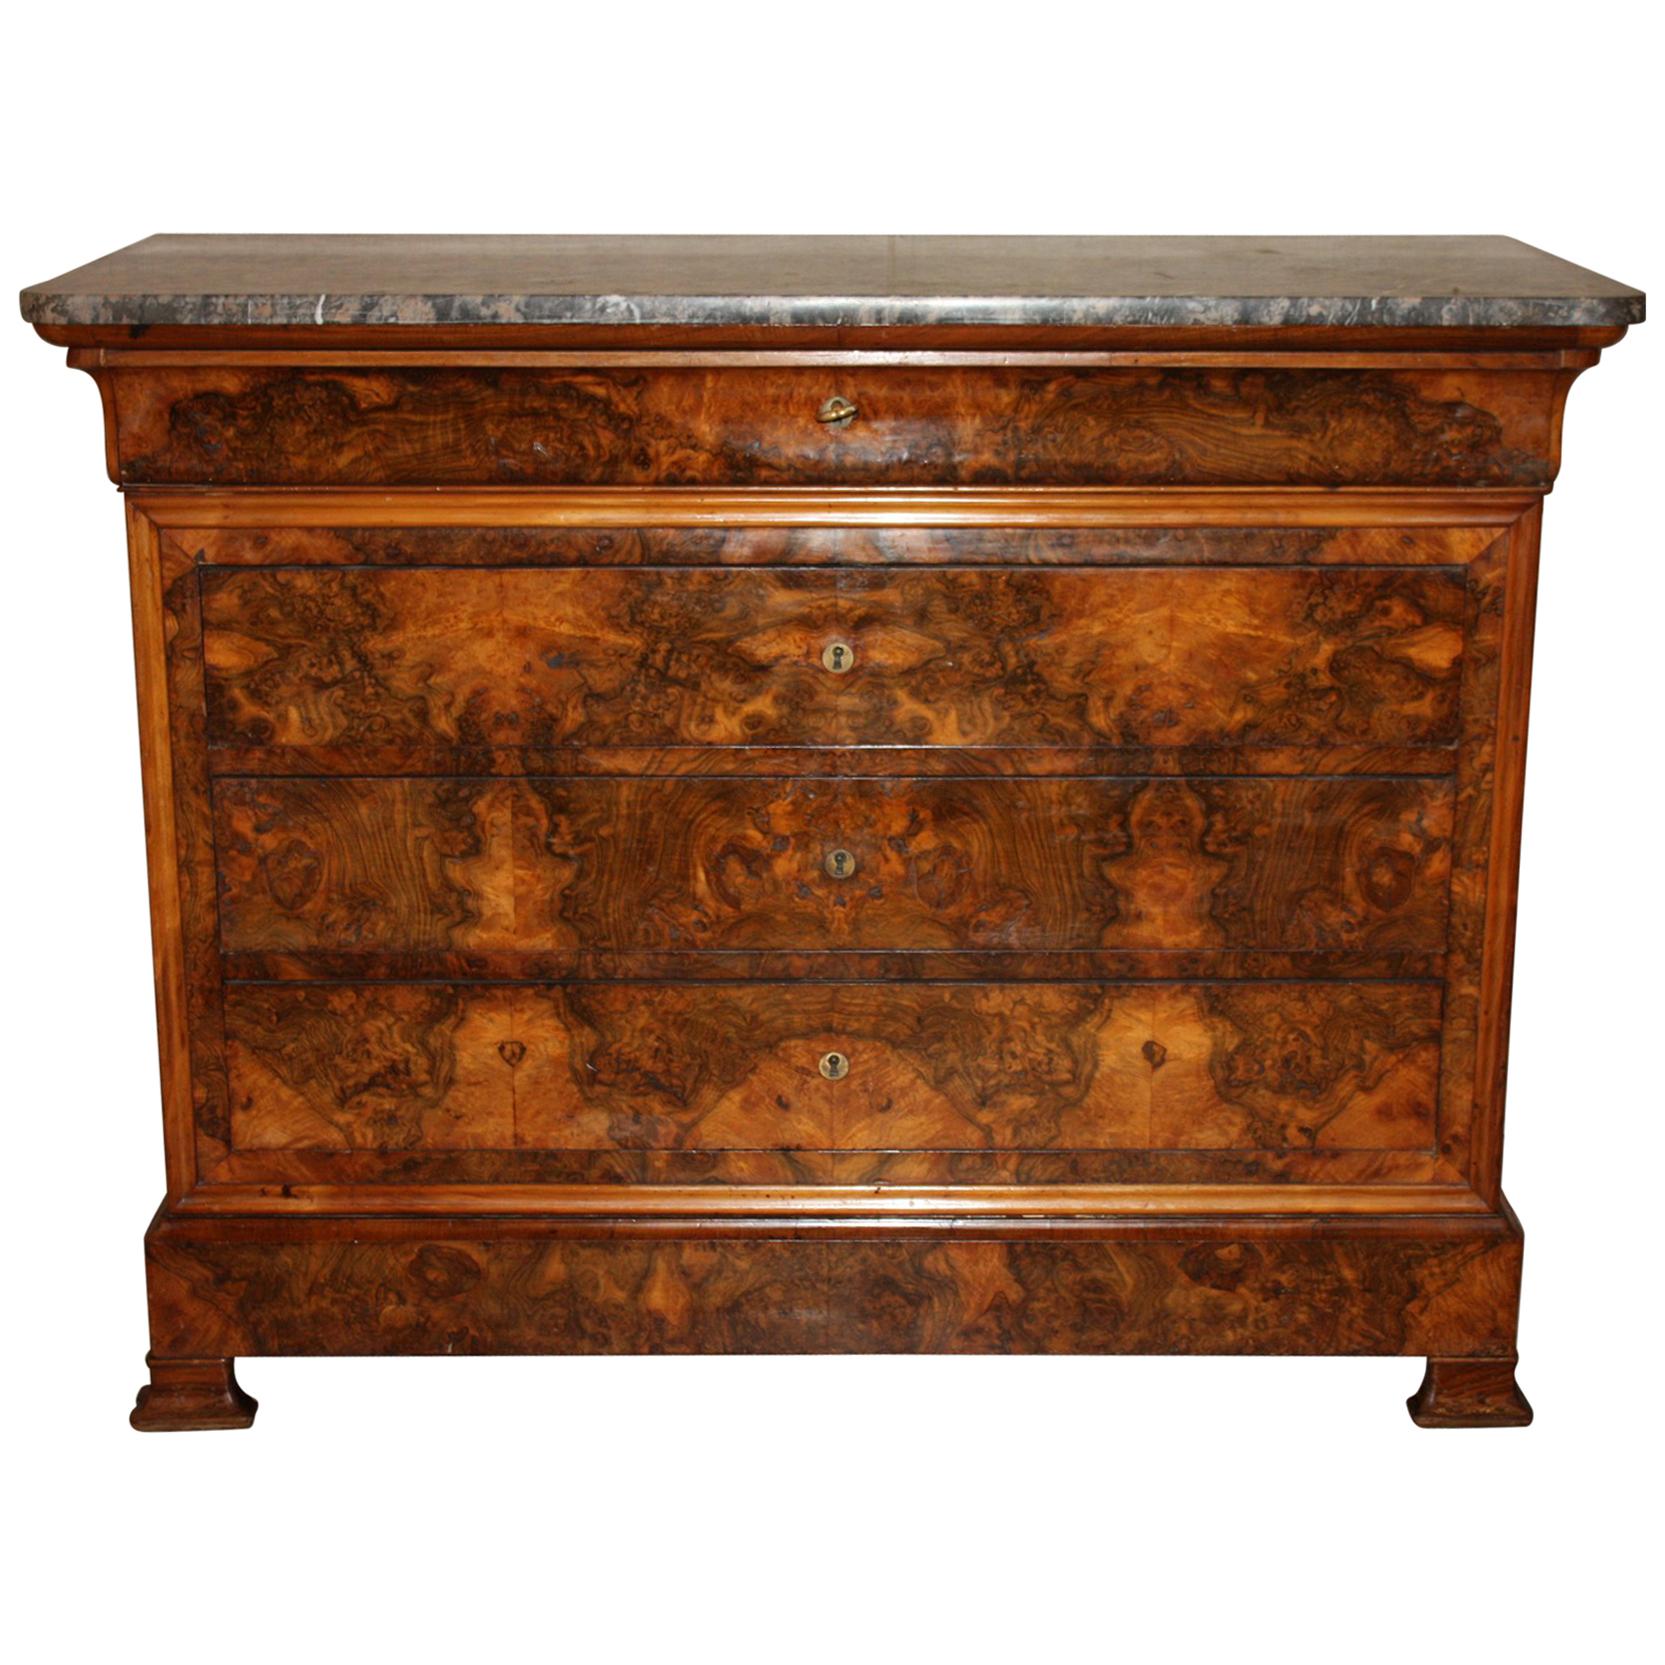 French Louise-Philippe Marble-Top Walnut Commode